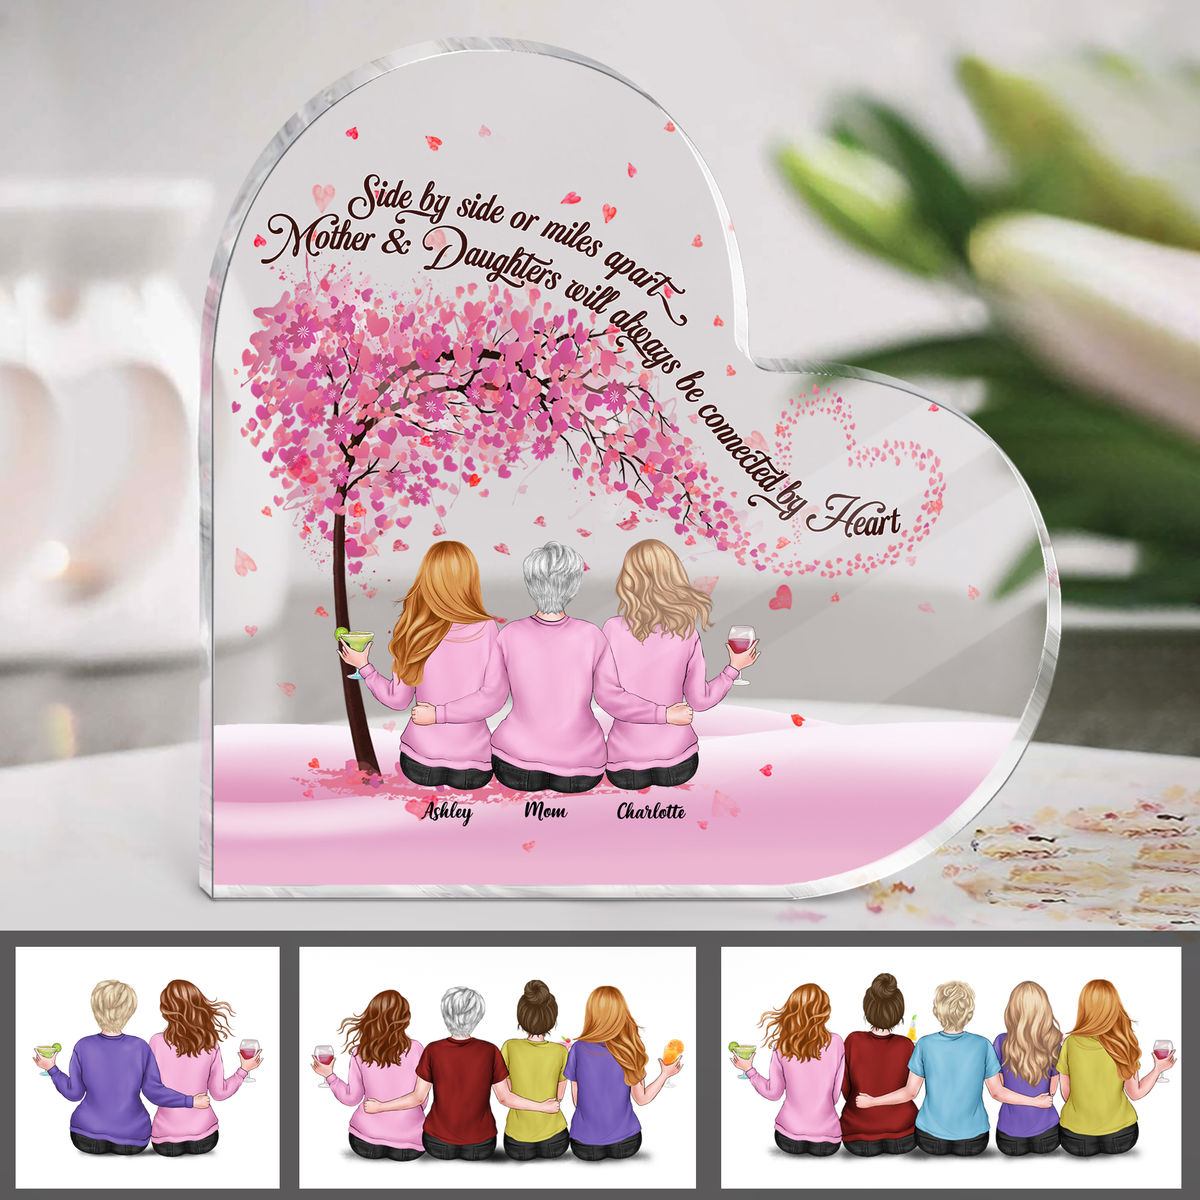 Personalized Desktop - Heart Transparent Plaque - Side by side or miles apart, mother and daughters will always be connected by heart (Personalized body) (23548)